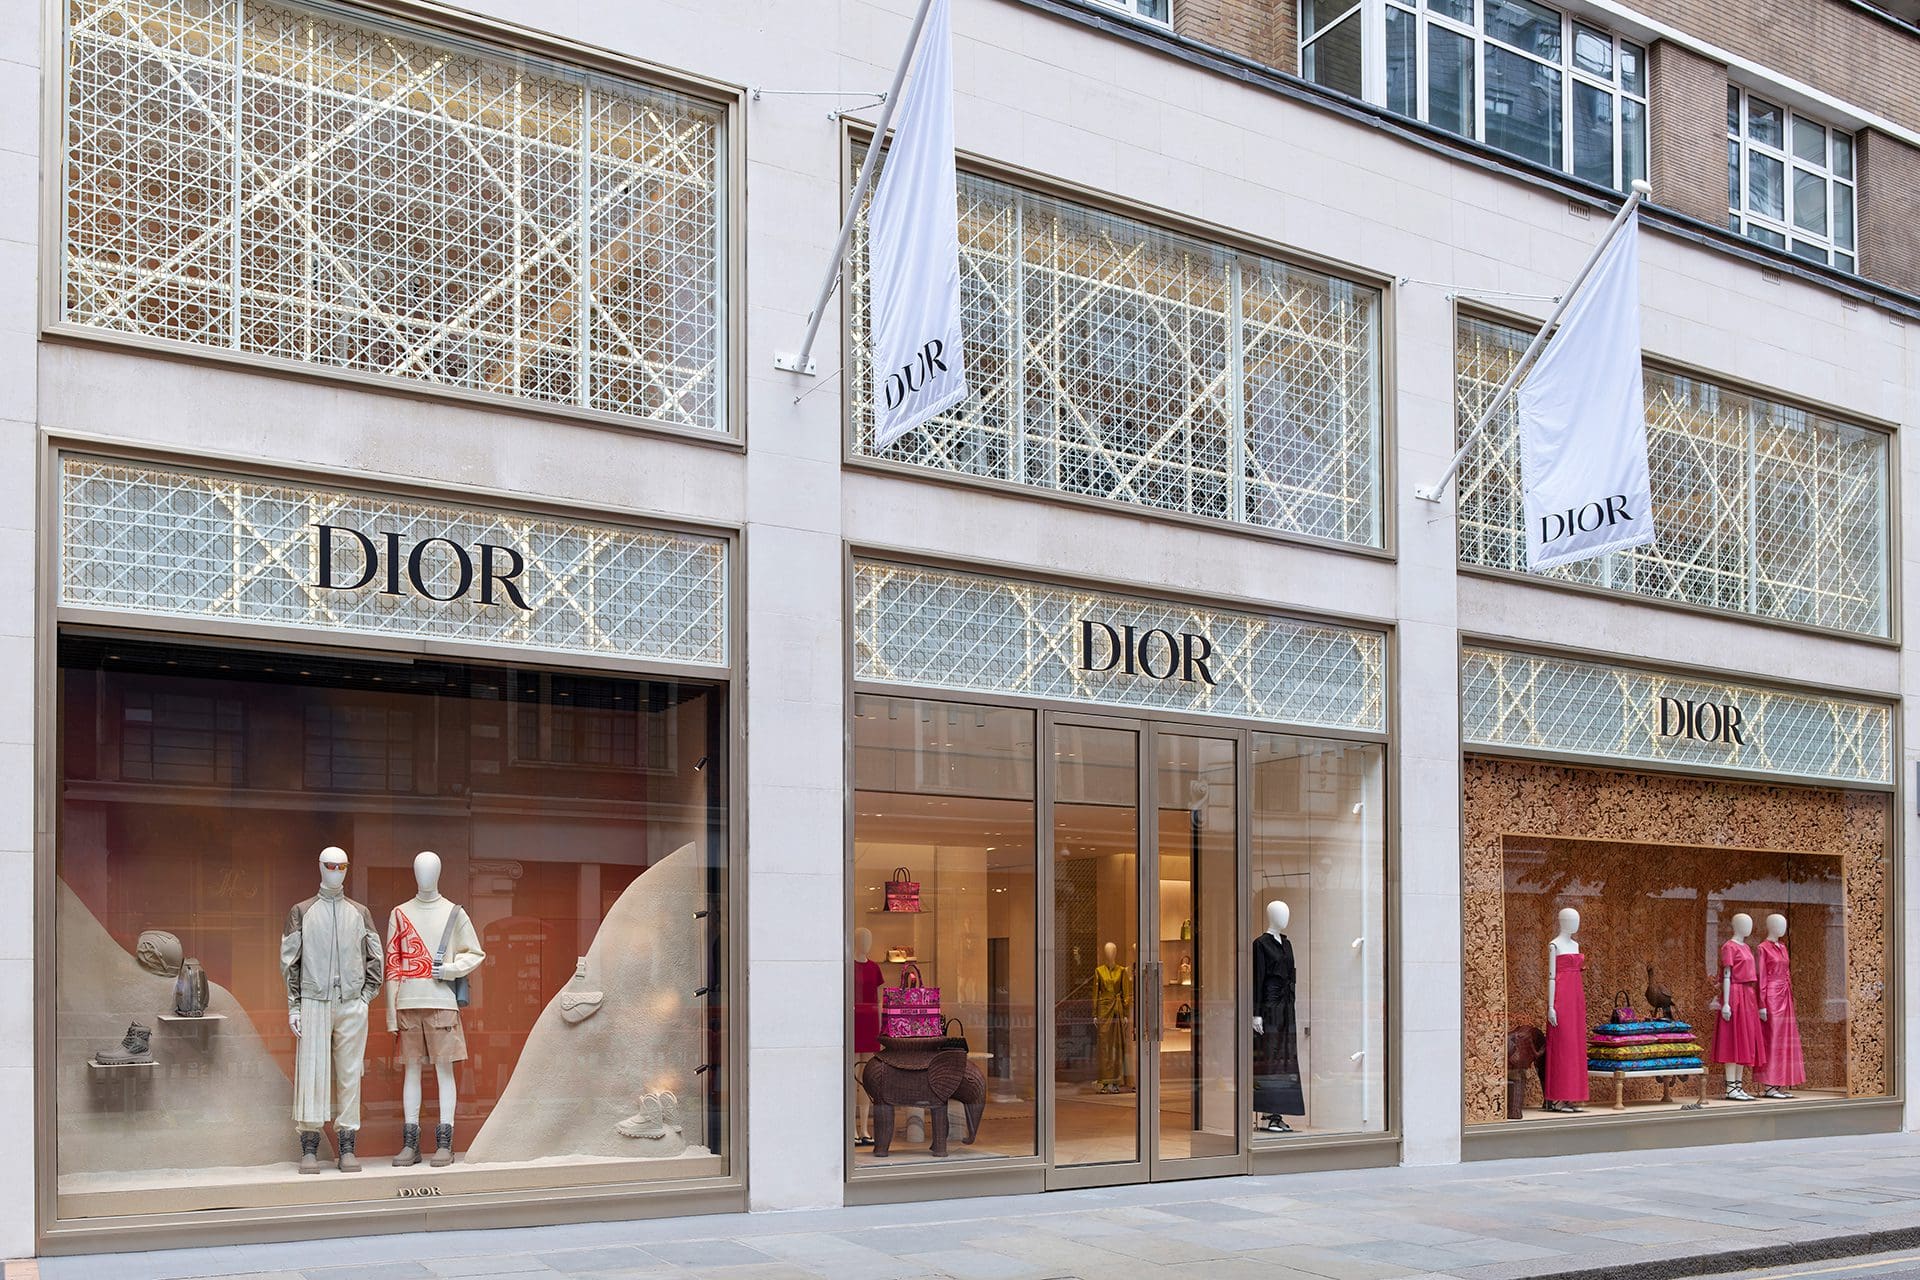 First look: Off-White's new Sloane Street store